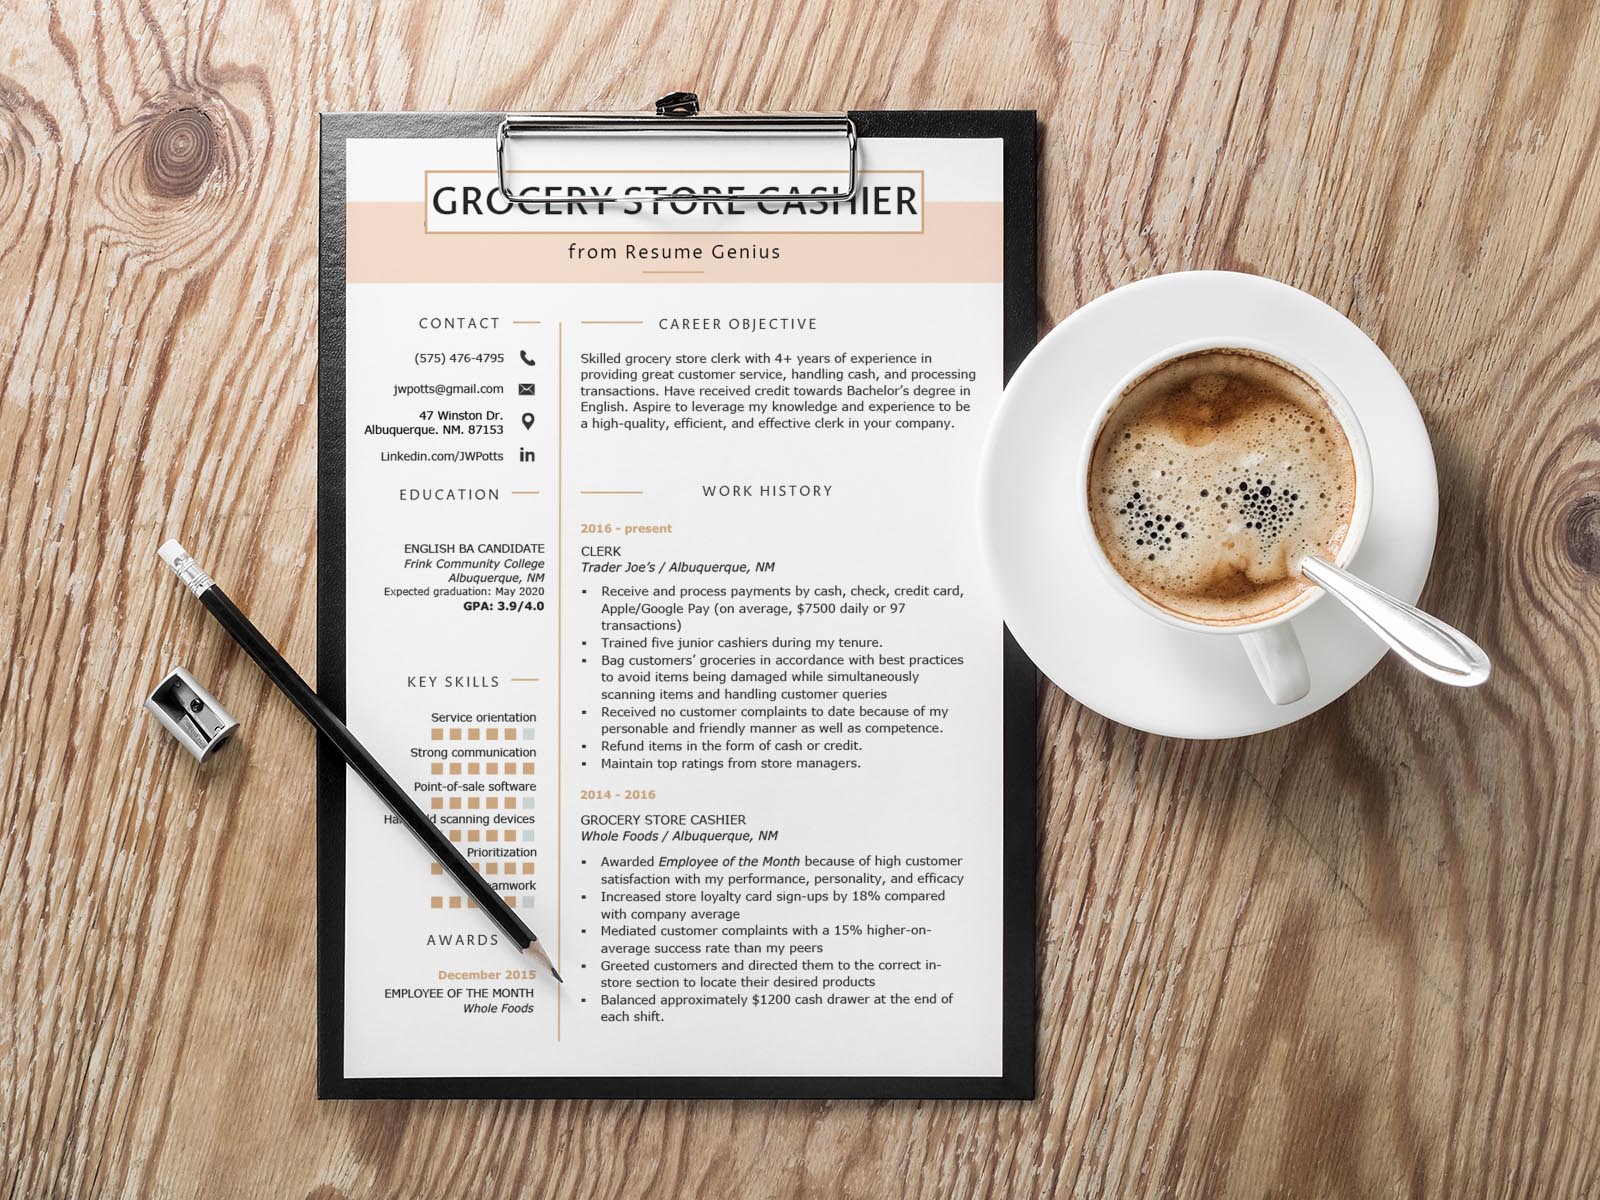 Free Grocery Store Cashier Resume Template for Your Next Job Opportunity